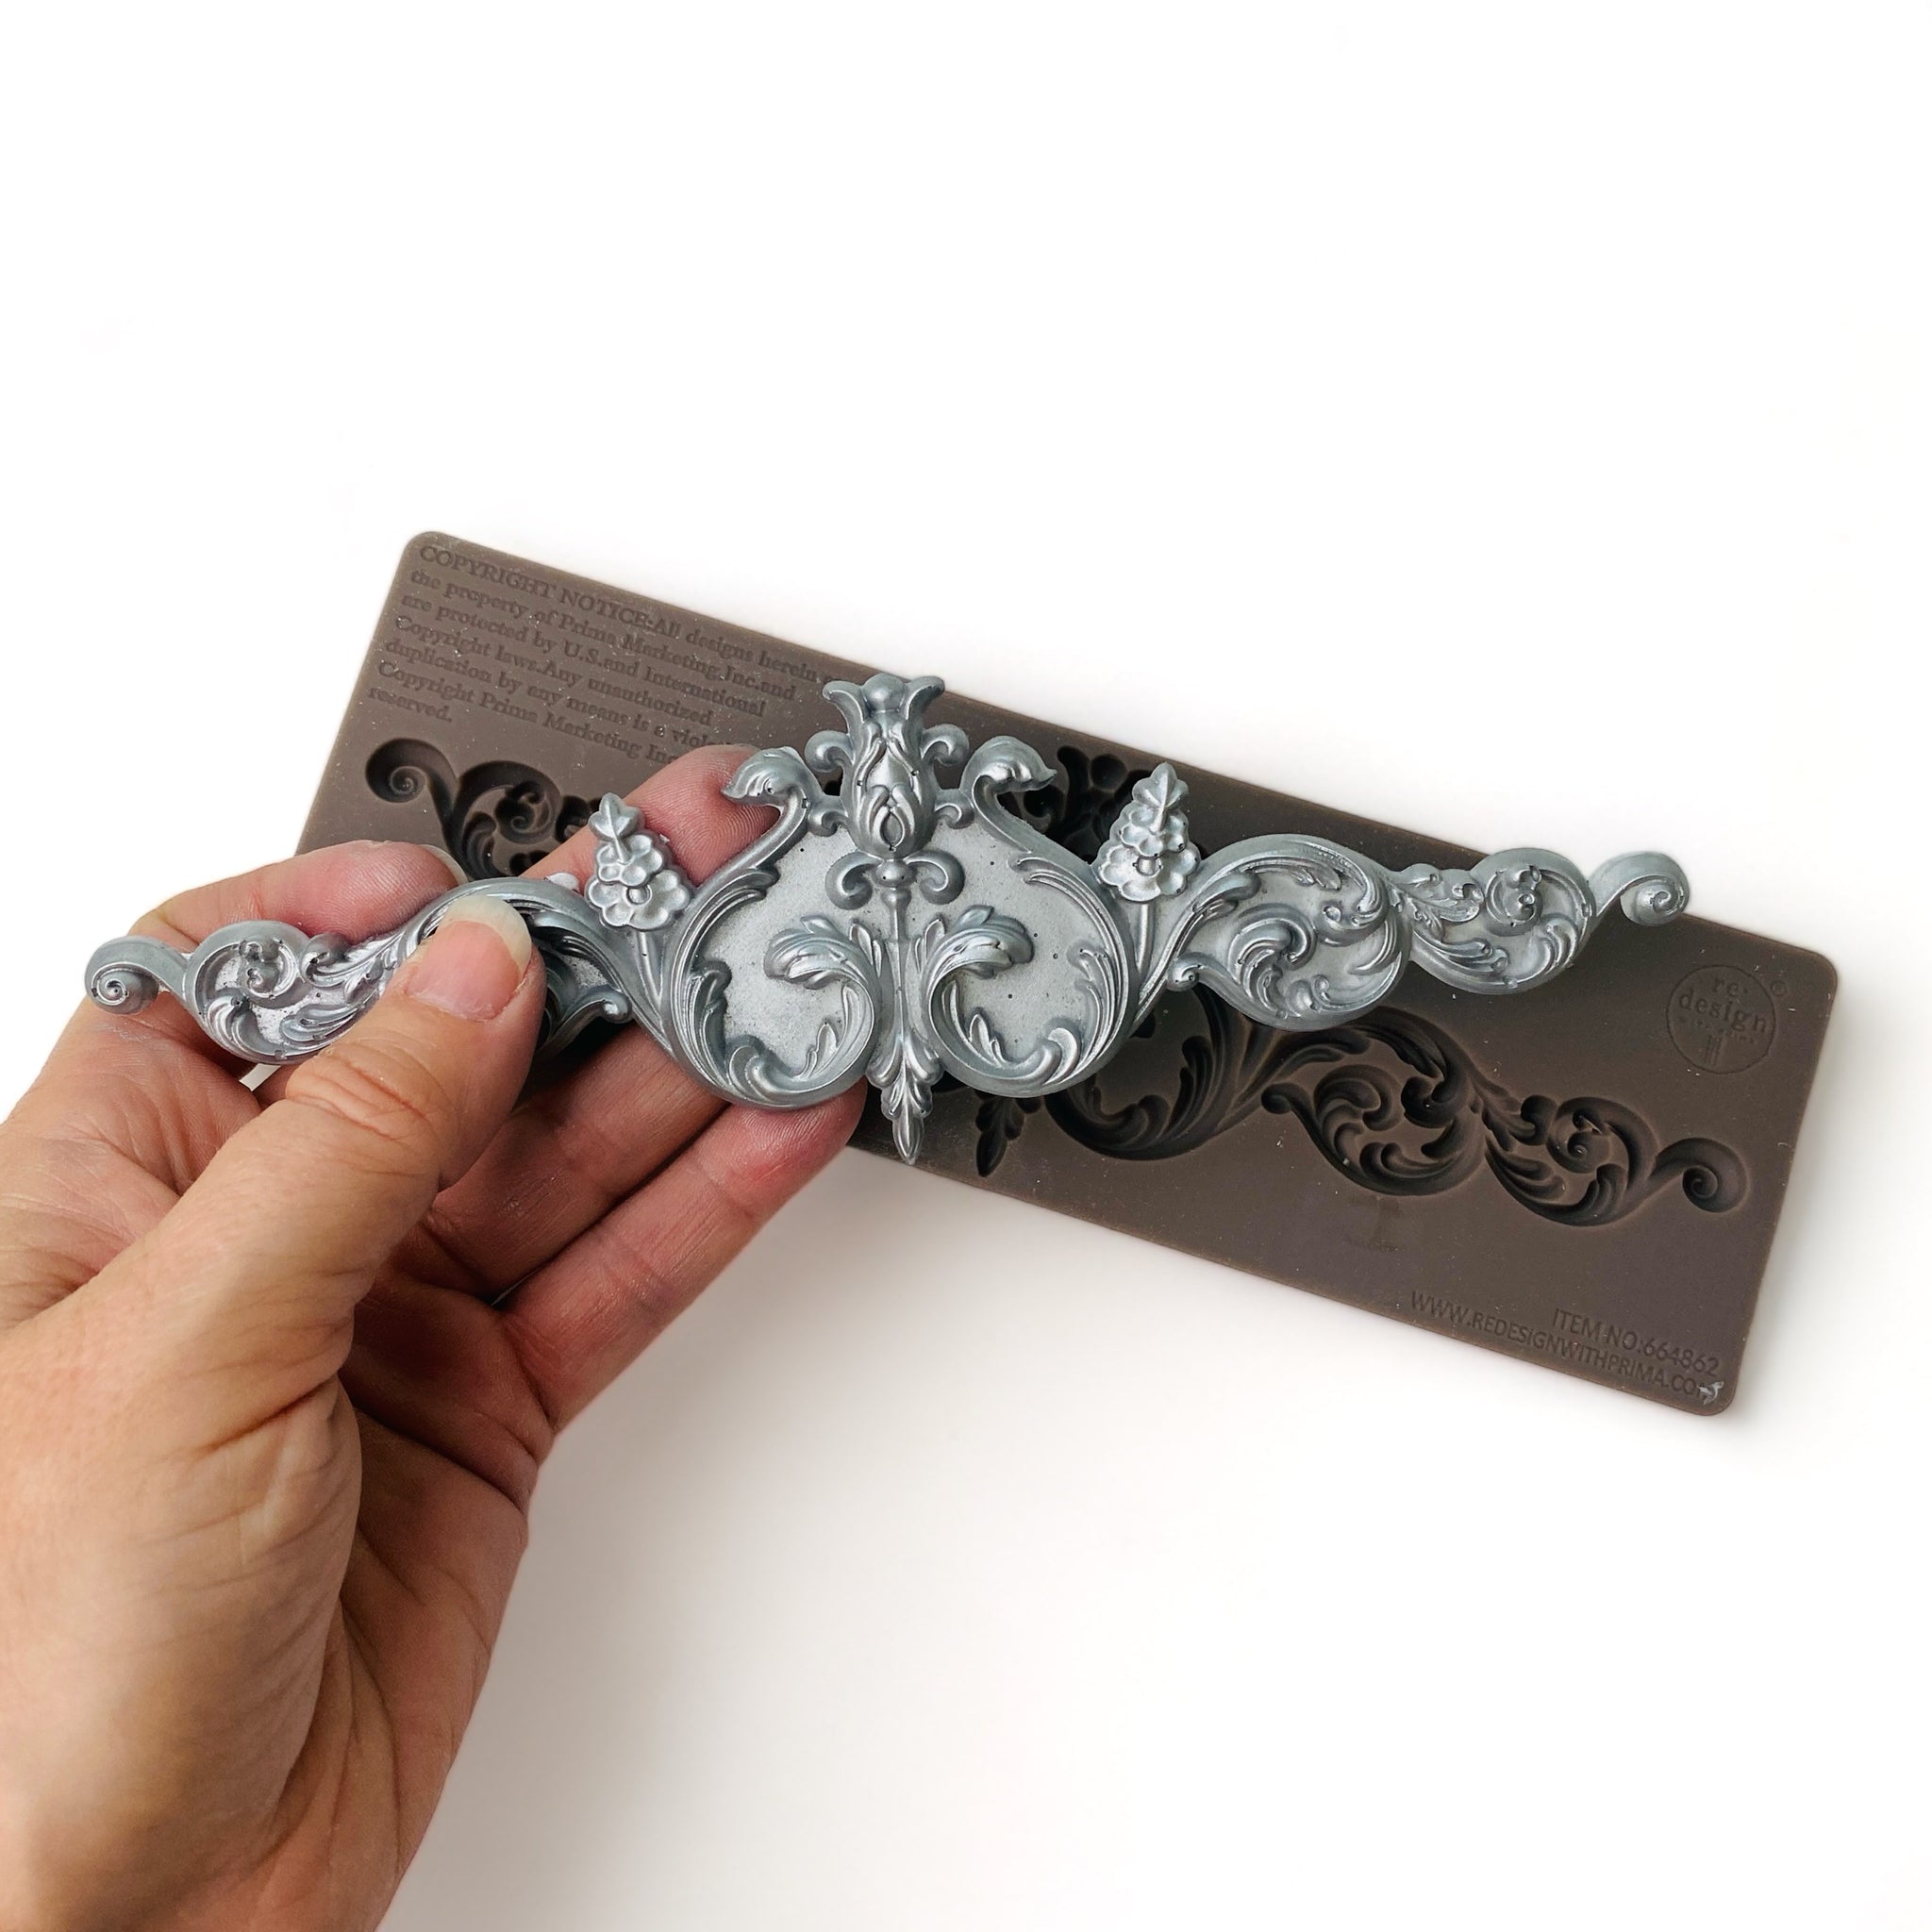 A brown silicone mold and a hand holding a silver colored casting of an ornate scroll design are against a white background.